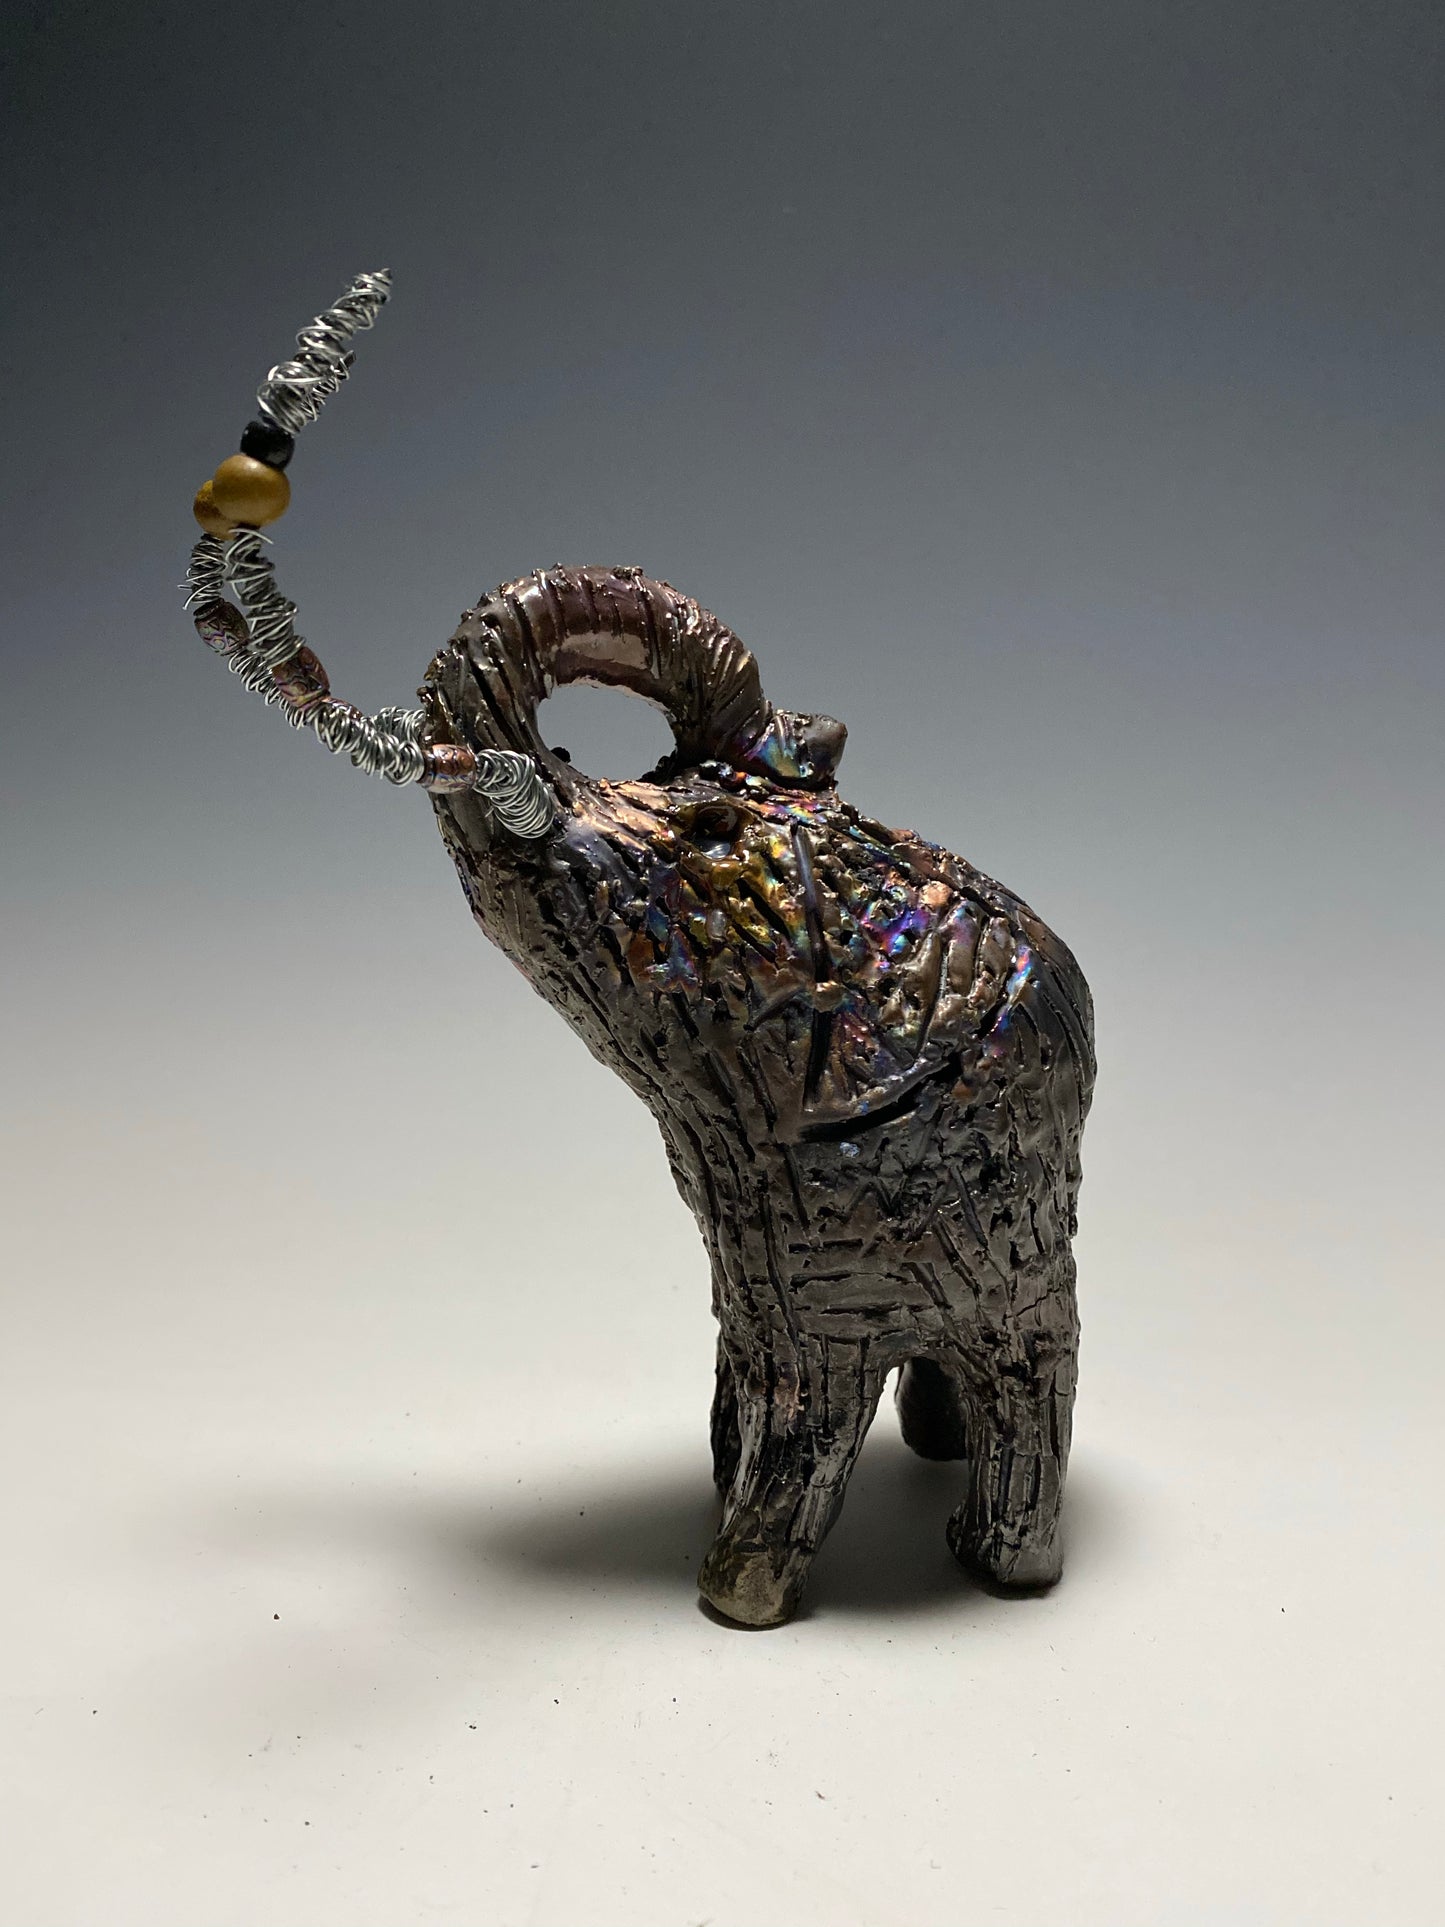 Raku Elephant Have you HERD!!!!!!  Just one of these lovely Raku Fired Elephant will make an excellent gift for your  friend, sorority or for your home’ special place centerpiece.  6" x 4" x 4" 1lbs Wood beaded with  silver tusk Beautiful metallic raku colors For decorative purposely only.